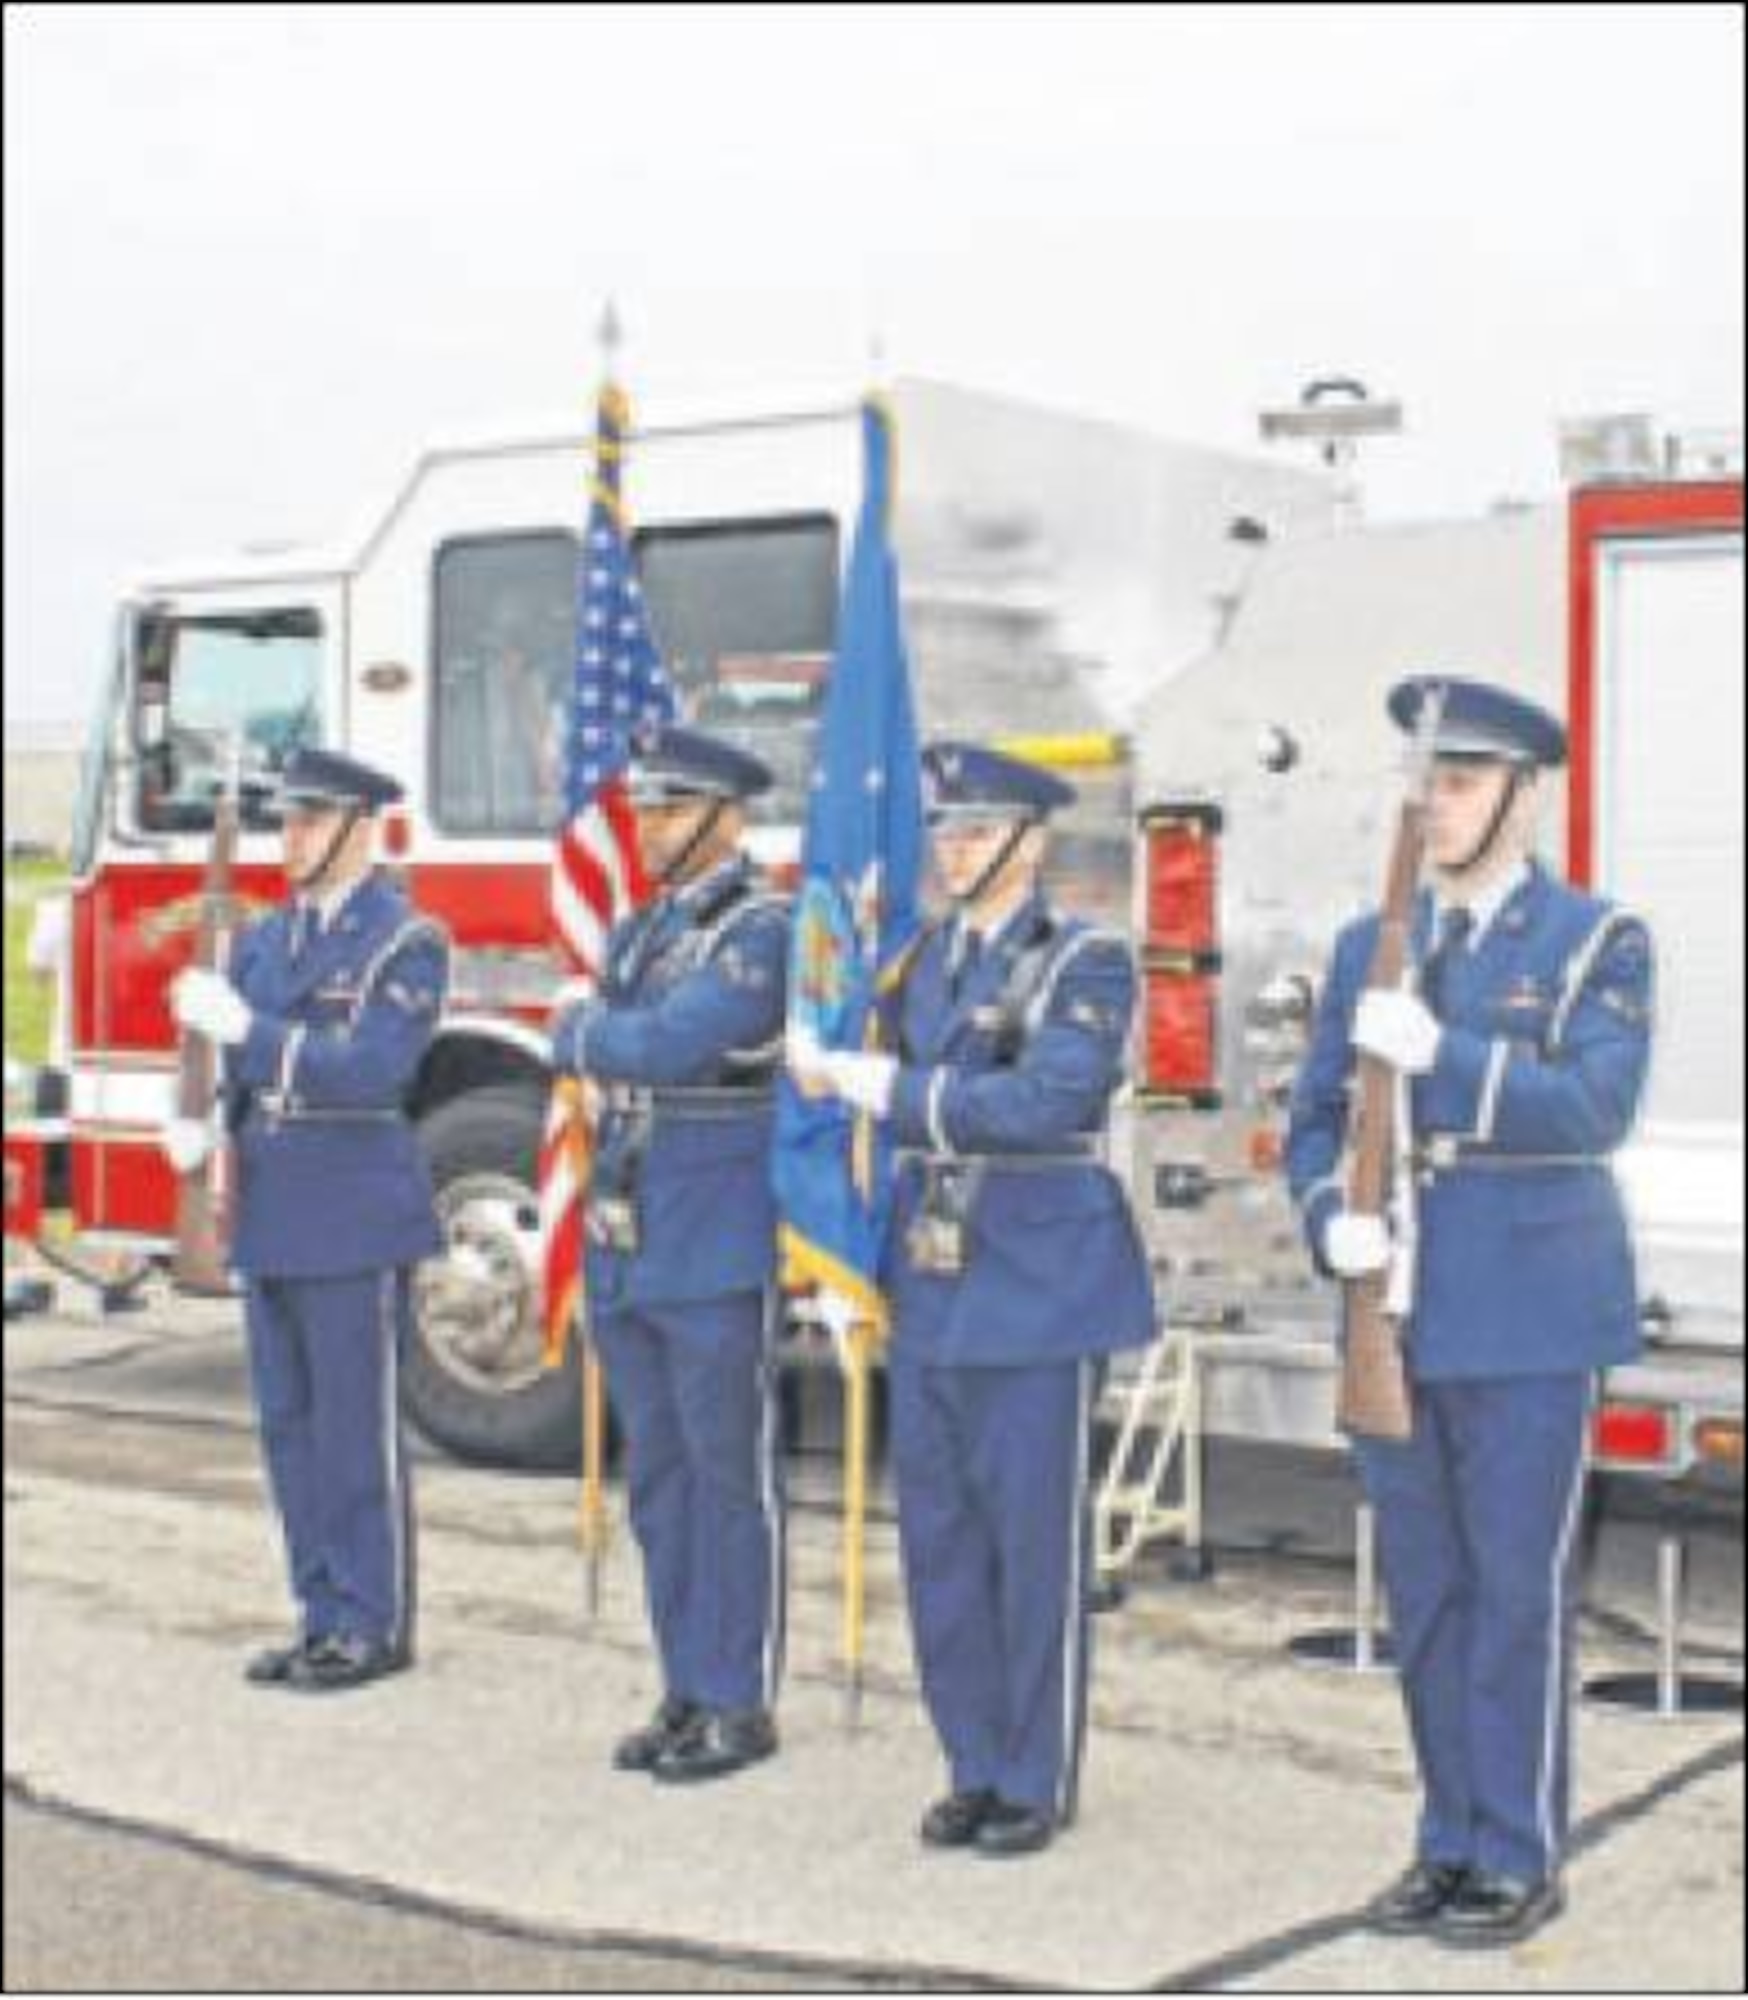 Members of the Wright-Patterson Air Force Base Honor Guard stand before a base fire truck, which included a memorial to first responders who died on Sept. 11, 2001. (Skywrighter photo by Tara Dixon Engel) 